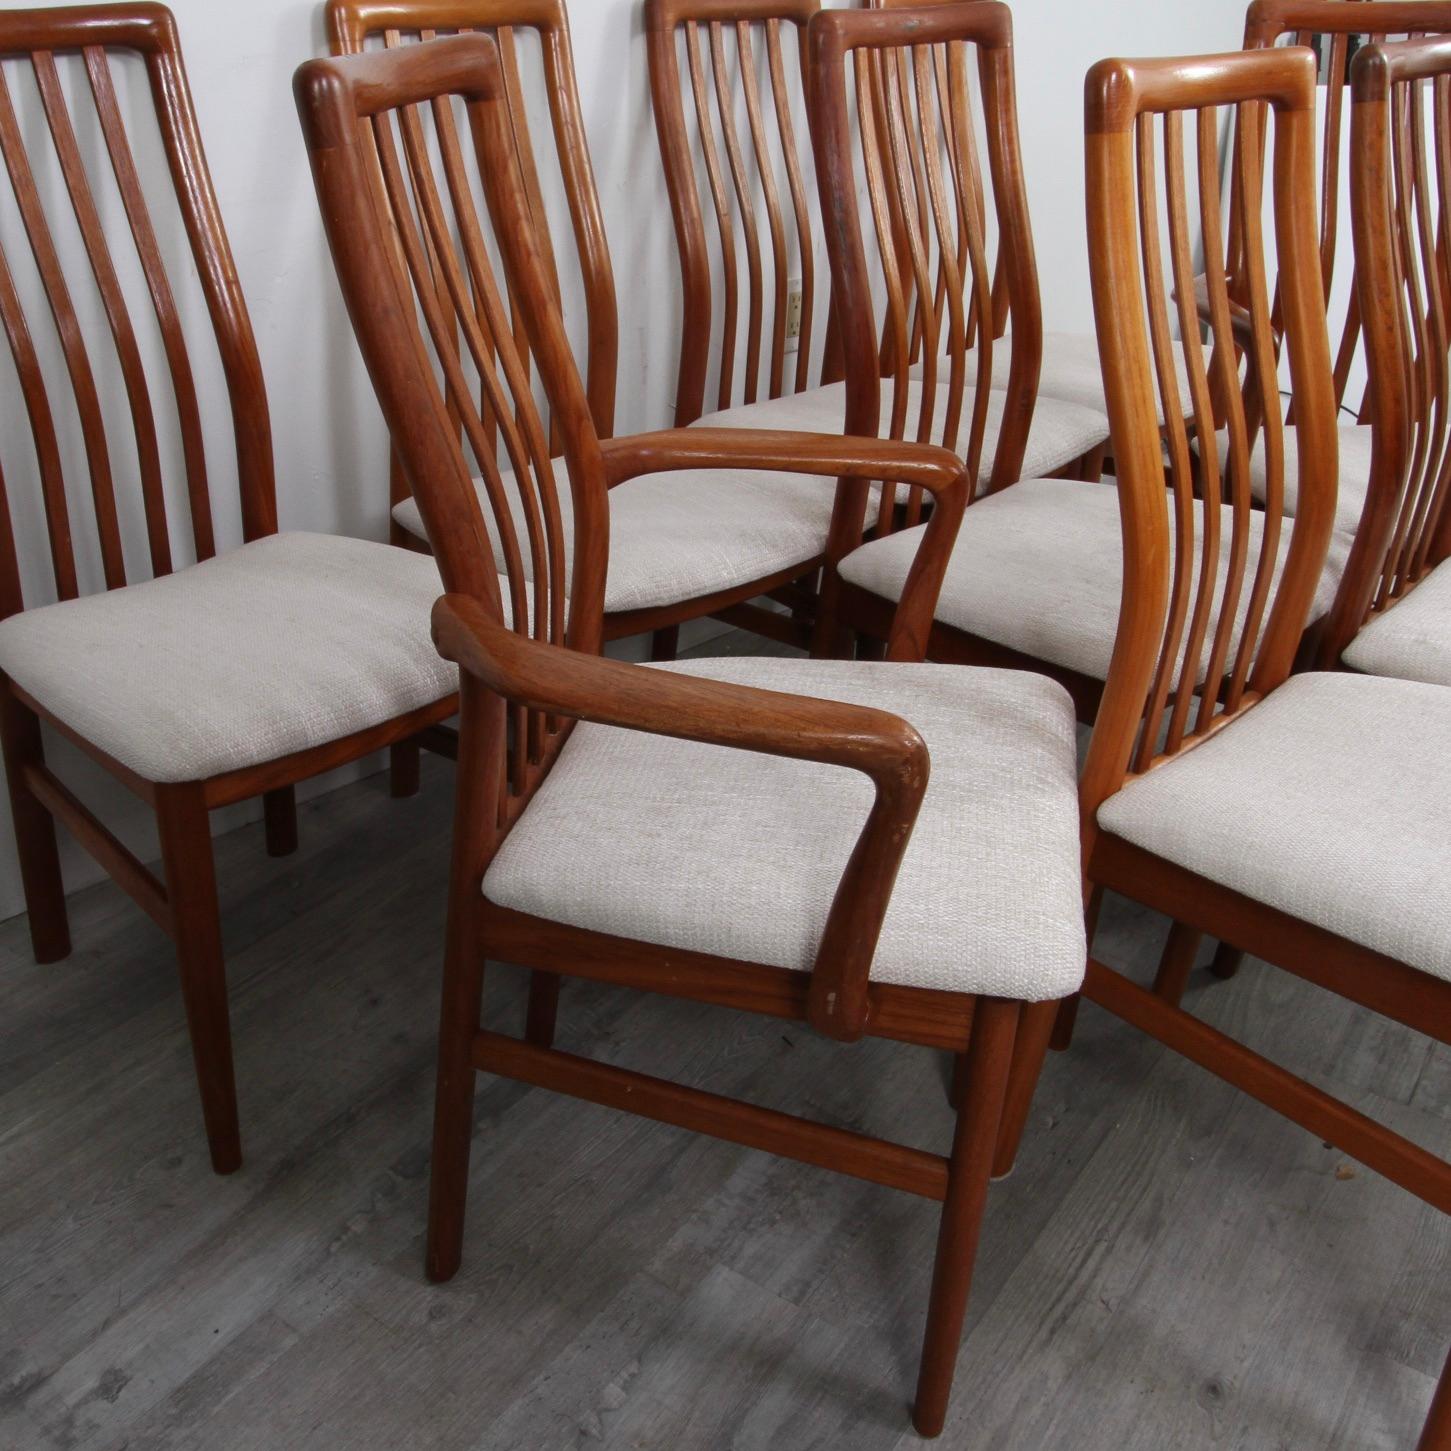 20th Century Set of 10 Danish Modern Teak Dining Chairs by SVA Møbler For Sale